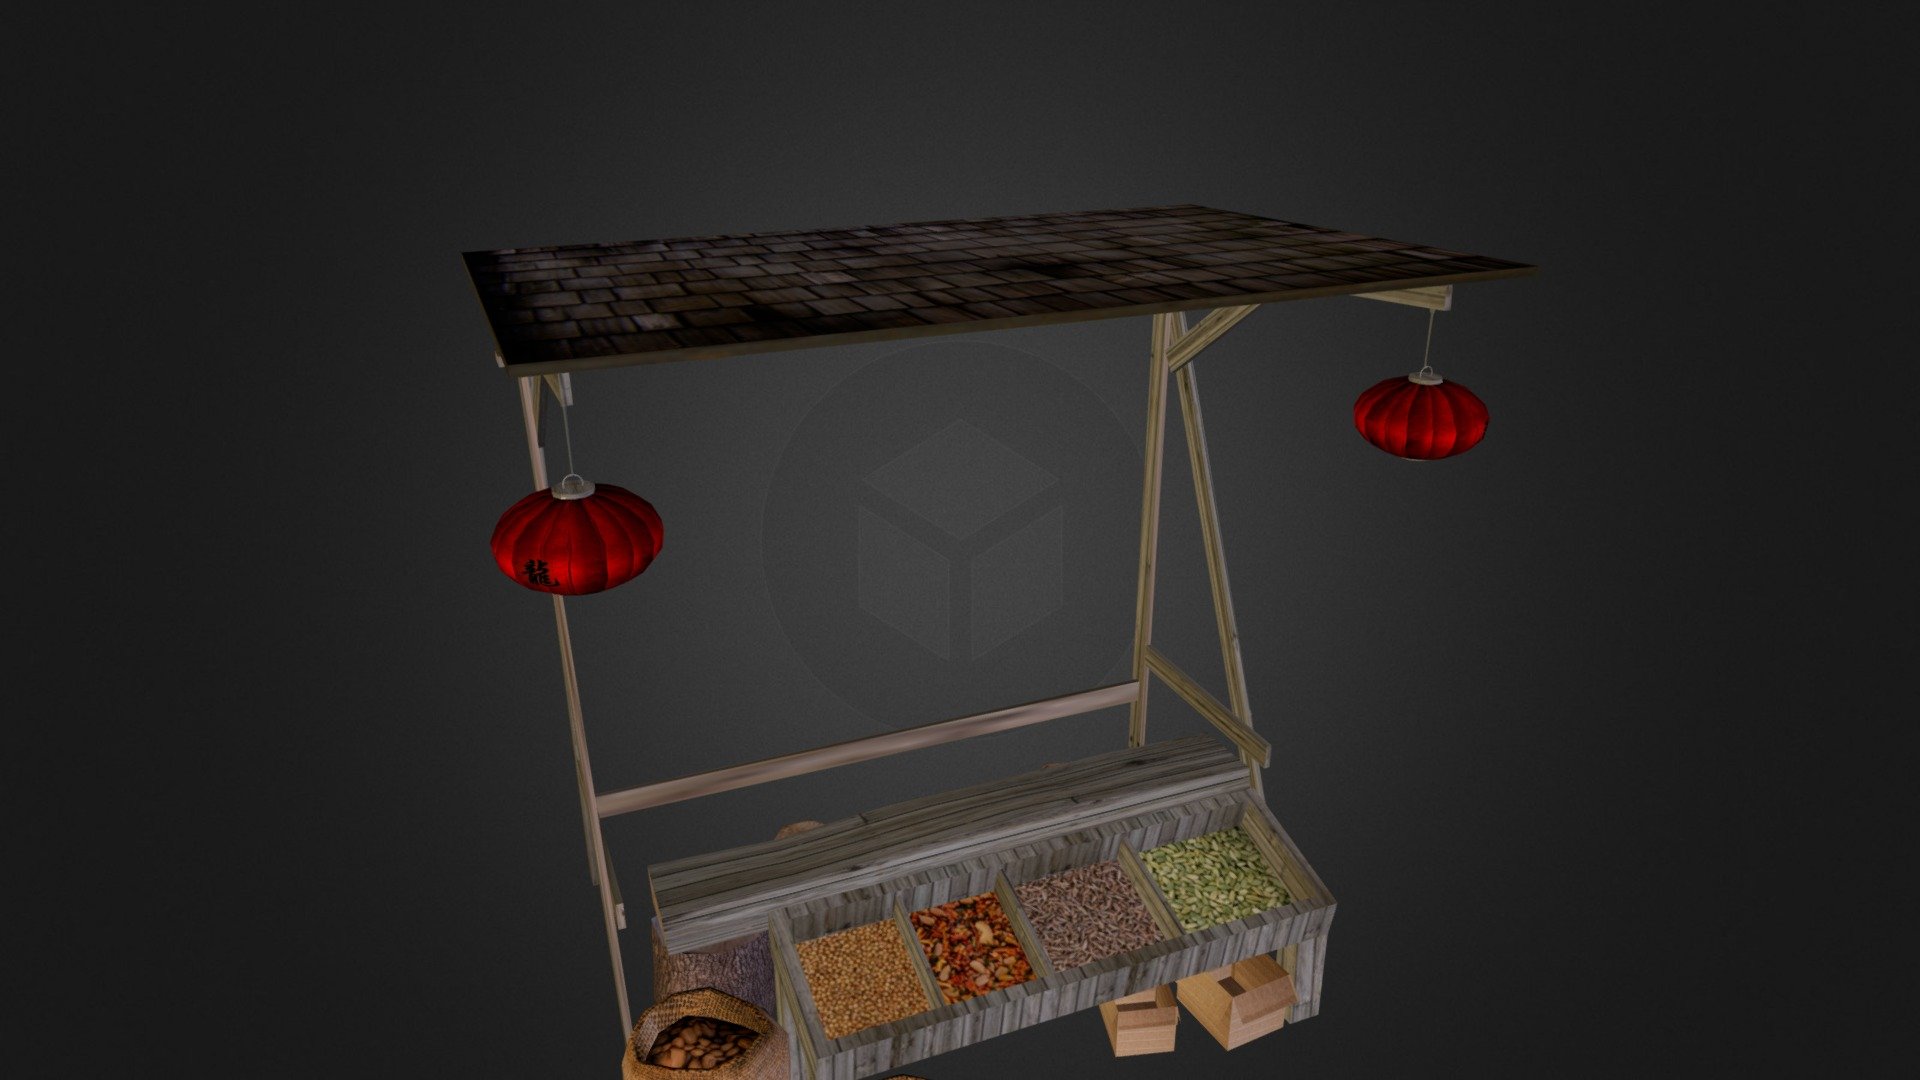 Work in prog crits welcome - Market Stall wip - 3D model by daviddc 3d model